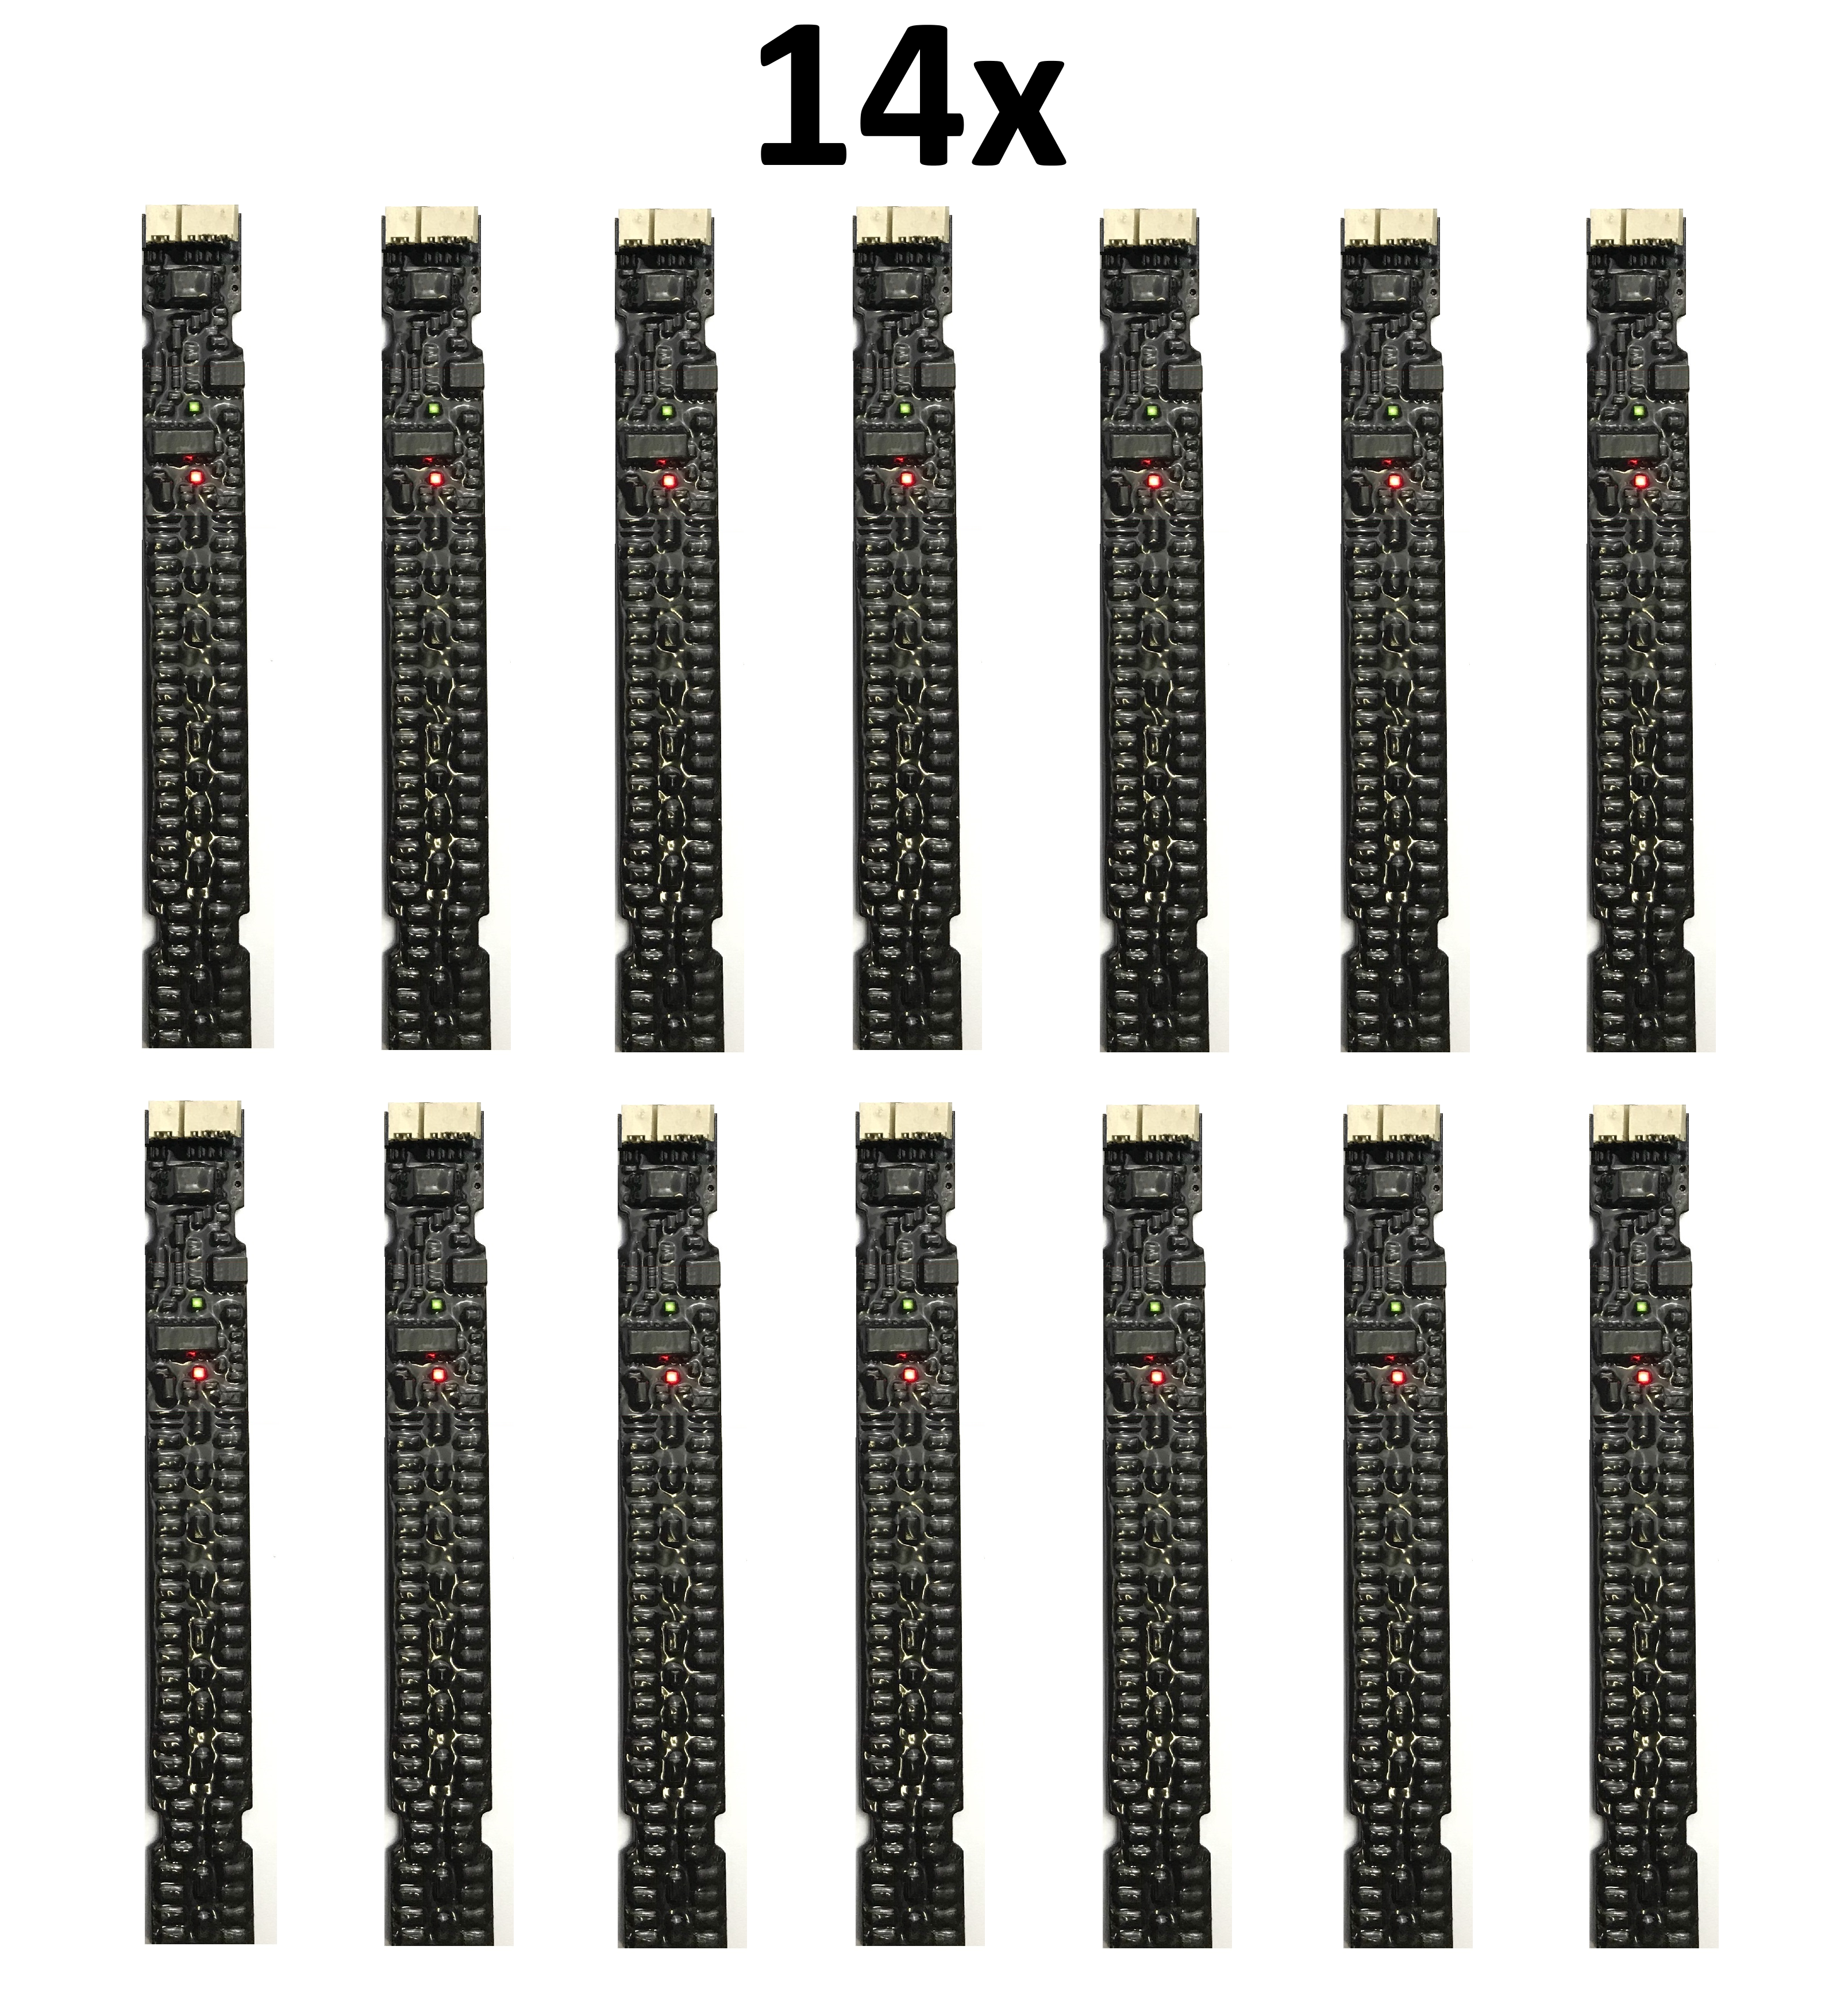 14x LongMon Cell Monitors with Cables